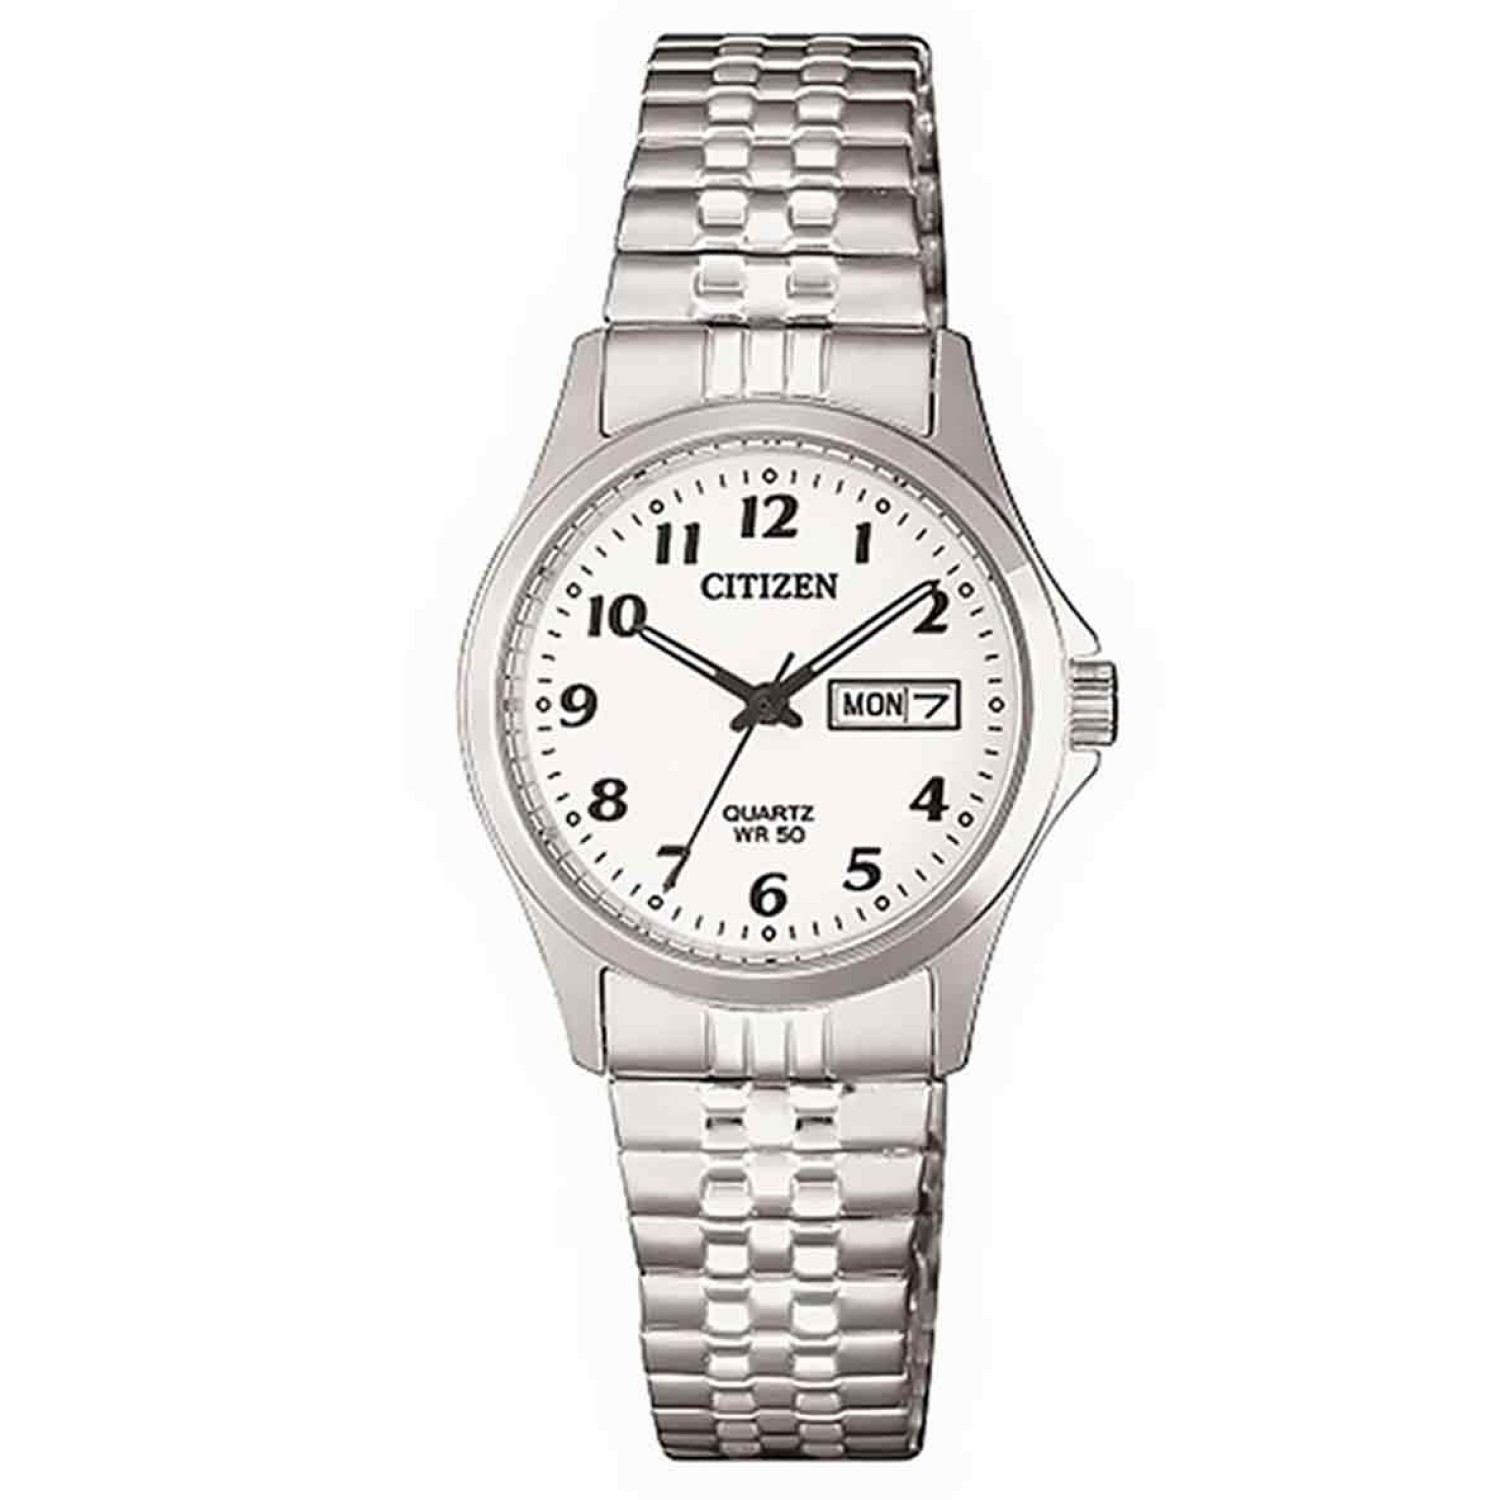 EQ2000-96A Citizen Ladies Watch. Brushed and polished silver tones give it a stylish edge that works as well in the office as it does with jeans and a t-shirt, while easy to read white dial with date display, stainless steel construction, WR50/5bar and @c